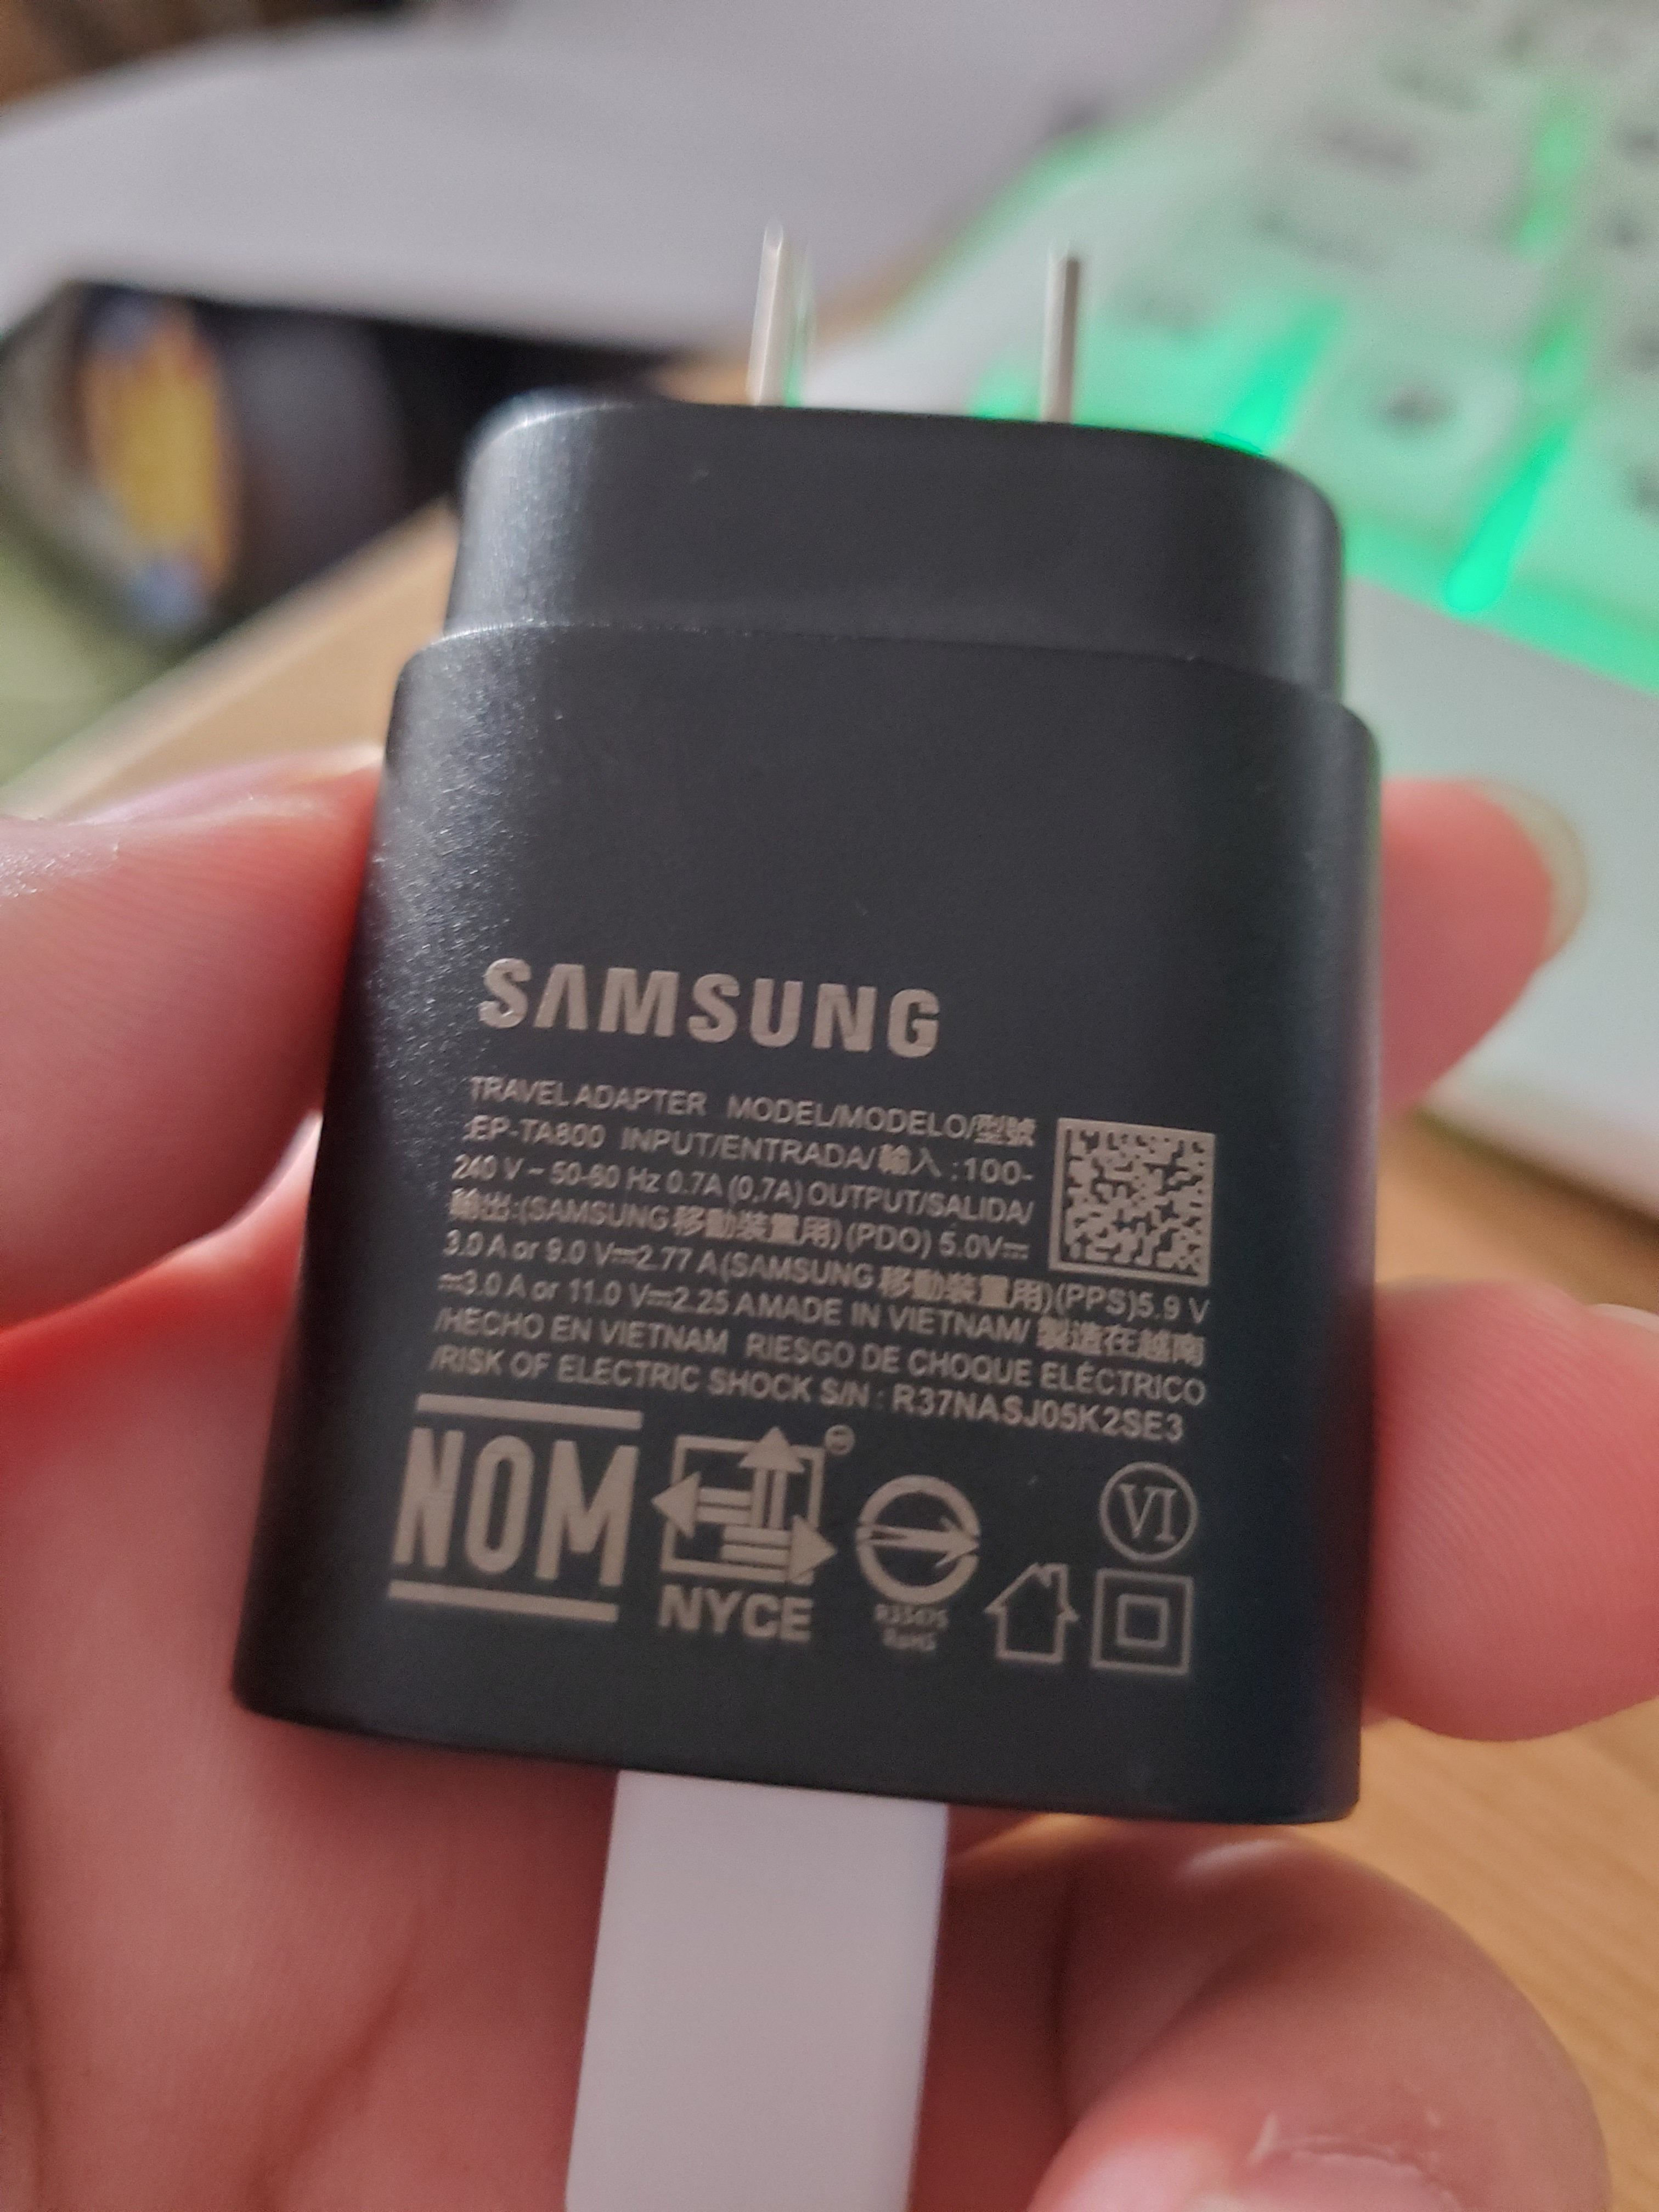 Is this EP-TA800 25W charger fake? - Samsung Community